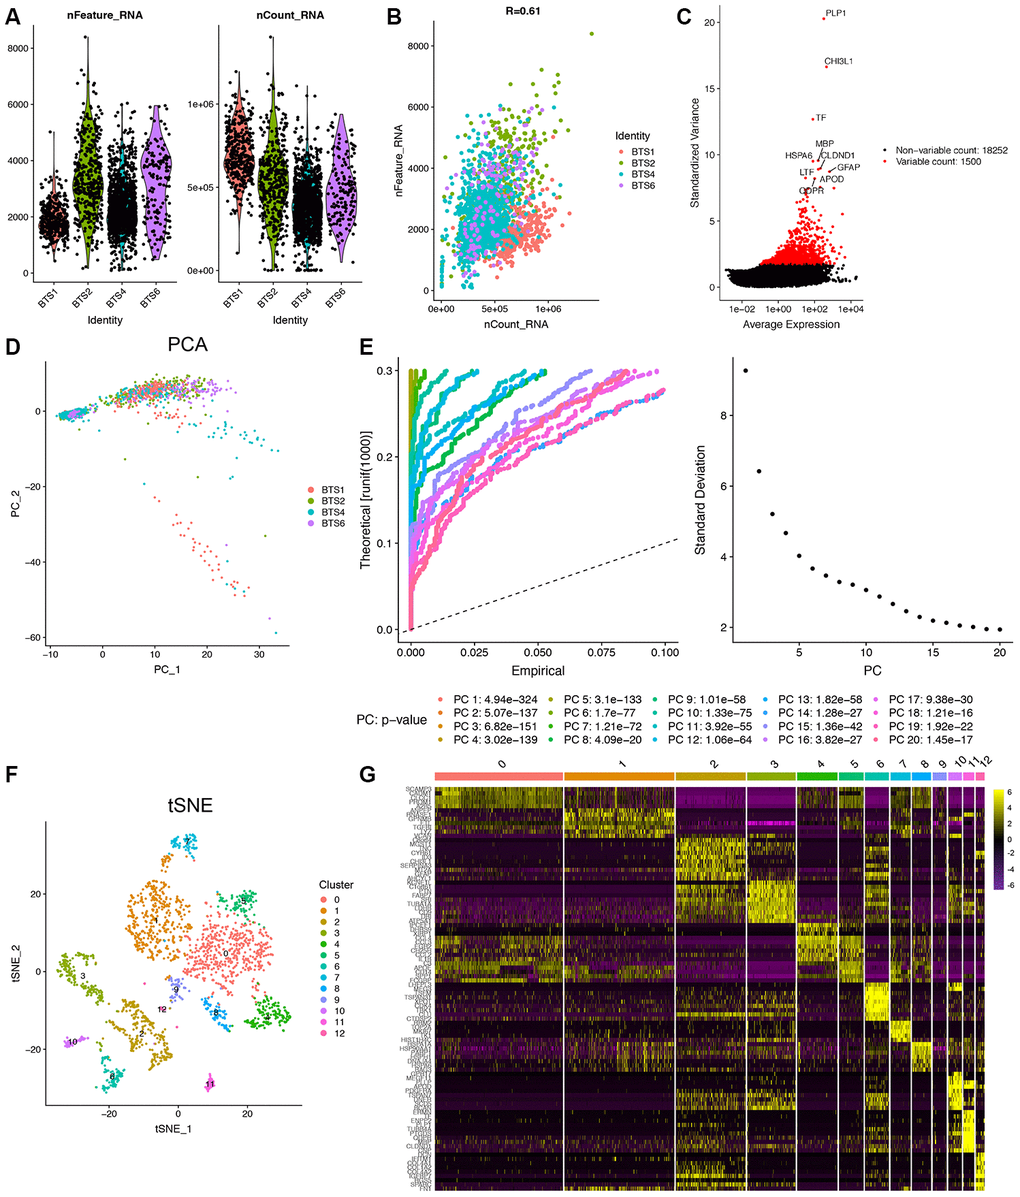 Identification of 13 cell clusters with diverse annotations revealing high cellular heterogeneity in GBM tumors based on single-cell RNA-seq data. (A) After quality control of the 2,343 cells from the tumor cores of 4 human GBM samples, 2,149 cells were included in the analysis. (B) The numbers of detected genes were significantly related to the sequencing depth, with a Pearson’s correlation coefficient of 0.61. (C) The variance diagram shows 19,752 corresponding genes throughout all cells from GBMs. The red dots represent highly variable genes, and the black dots represent nonvariable genes. The top 10 most variable genes are marked in the plot. (D) PCA did not demonstrate clear separations of cells in GBMs. (E) PCA identified the 20 PCs with an estimated P value F) The tSNE algorithm was applied for dimensionality reduction with the 20 PCs, and 13 cell clusters were successfully classified. (G) The differential analysis identified 8,025 marker genes. The top 20 marker genes of each cell cluster are displayed in the heatmap. A total of 96 genes are listed beside of the heatmap after omitting the same top marker genes among clusters. The colors from purple to yellow indicate the gene expression levels from low to high.